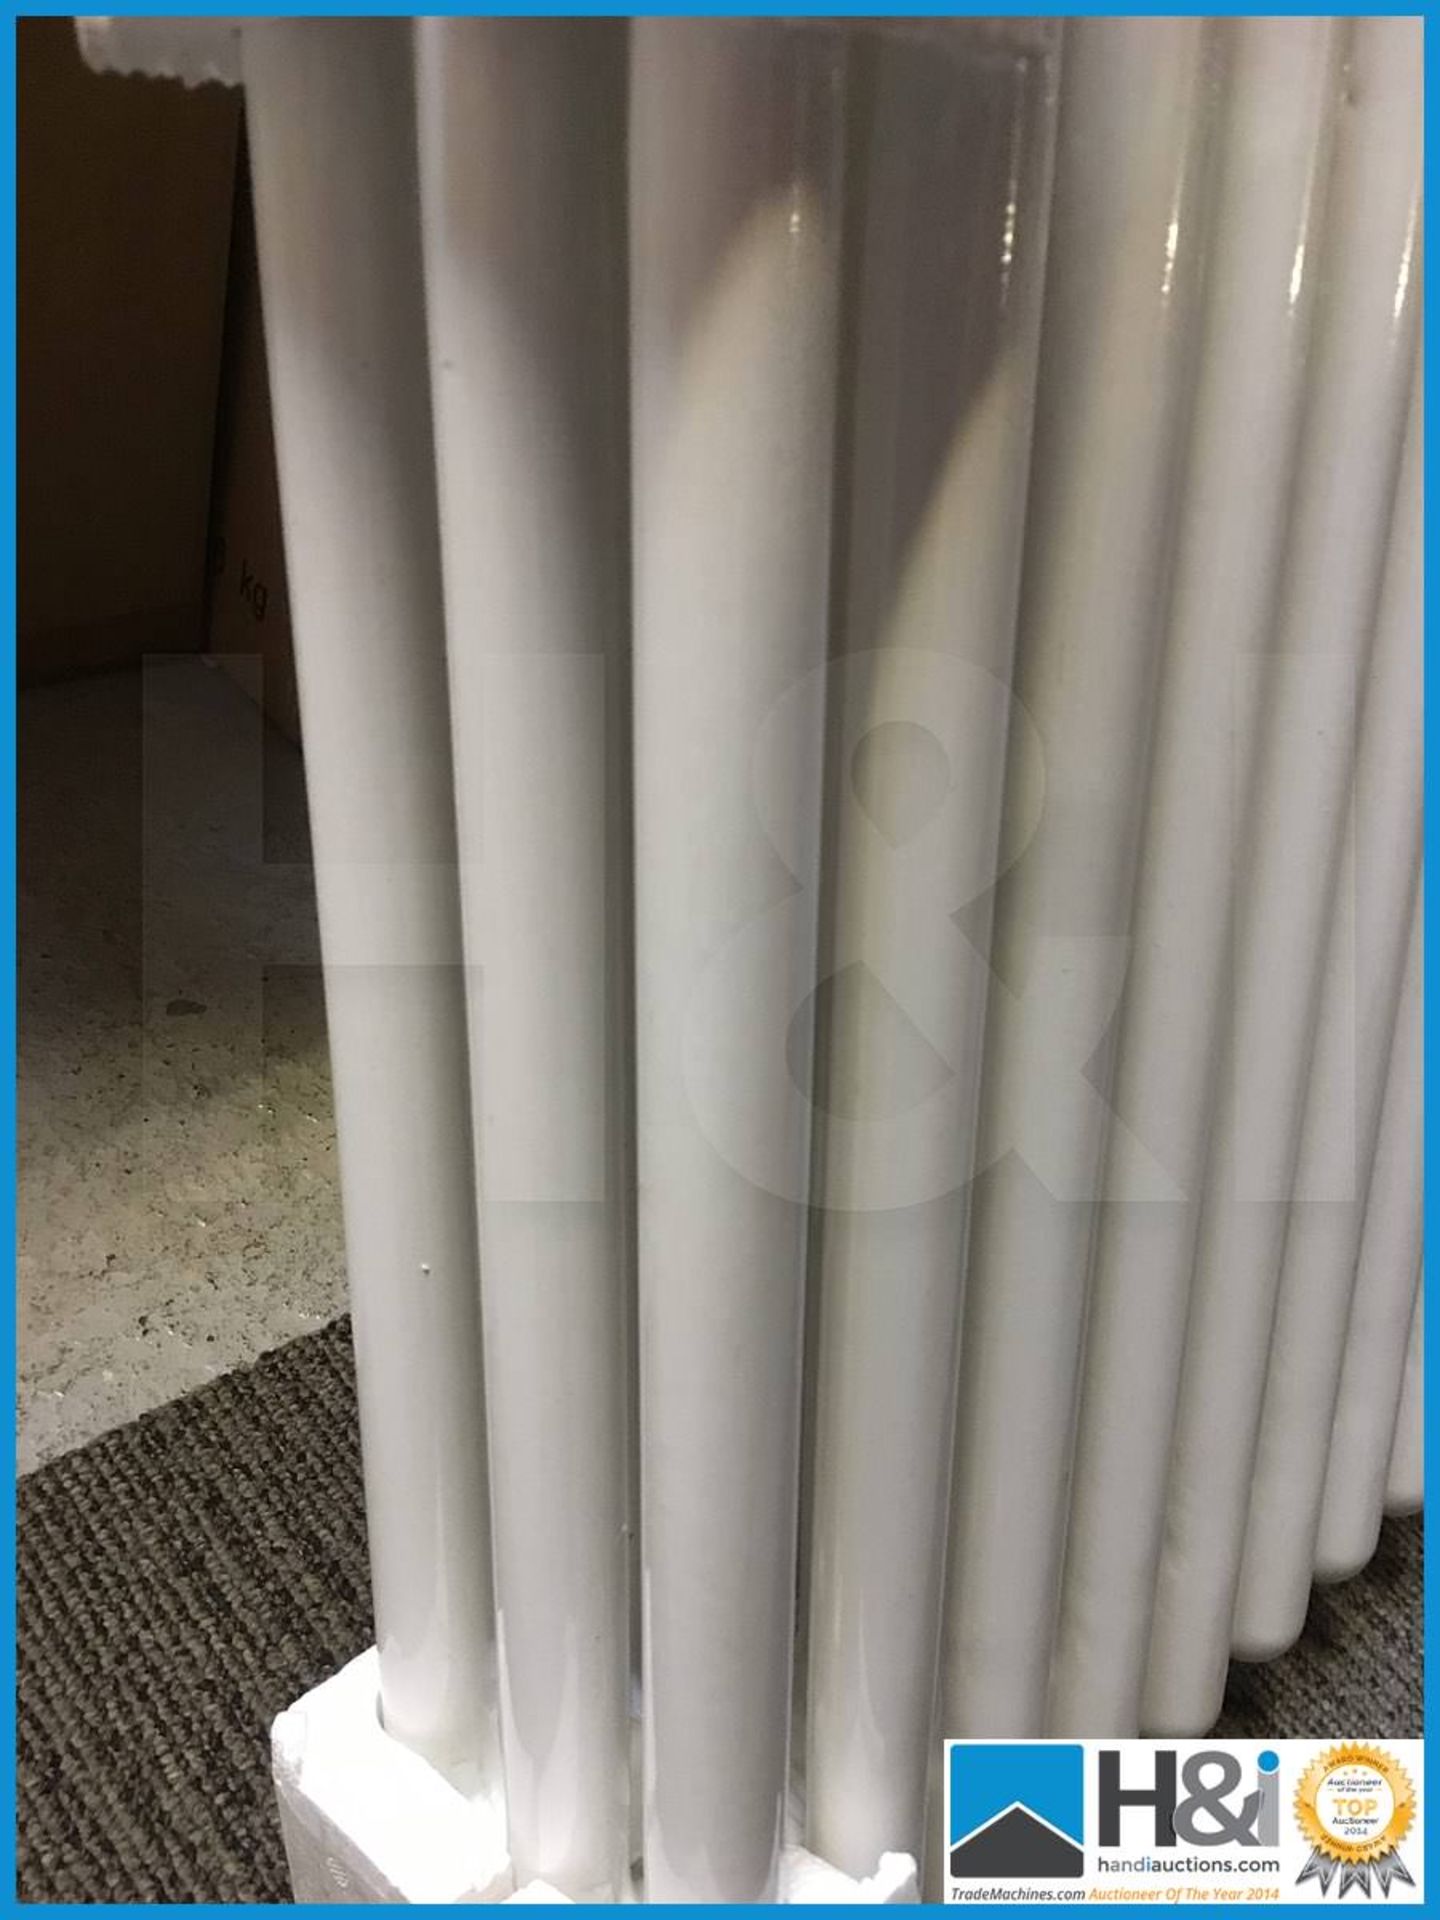 Stunning designer traditional style 3 column radiator in white finish. 500x700. Includes end caps - Image 2 of 4